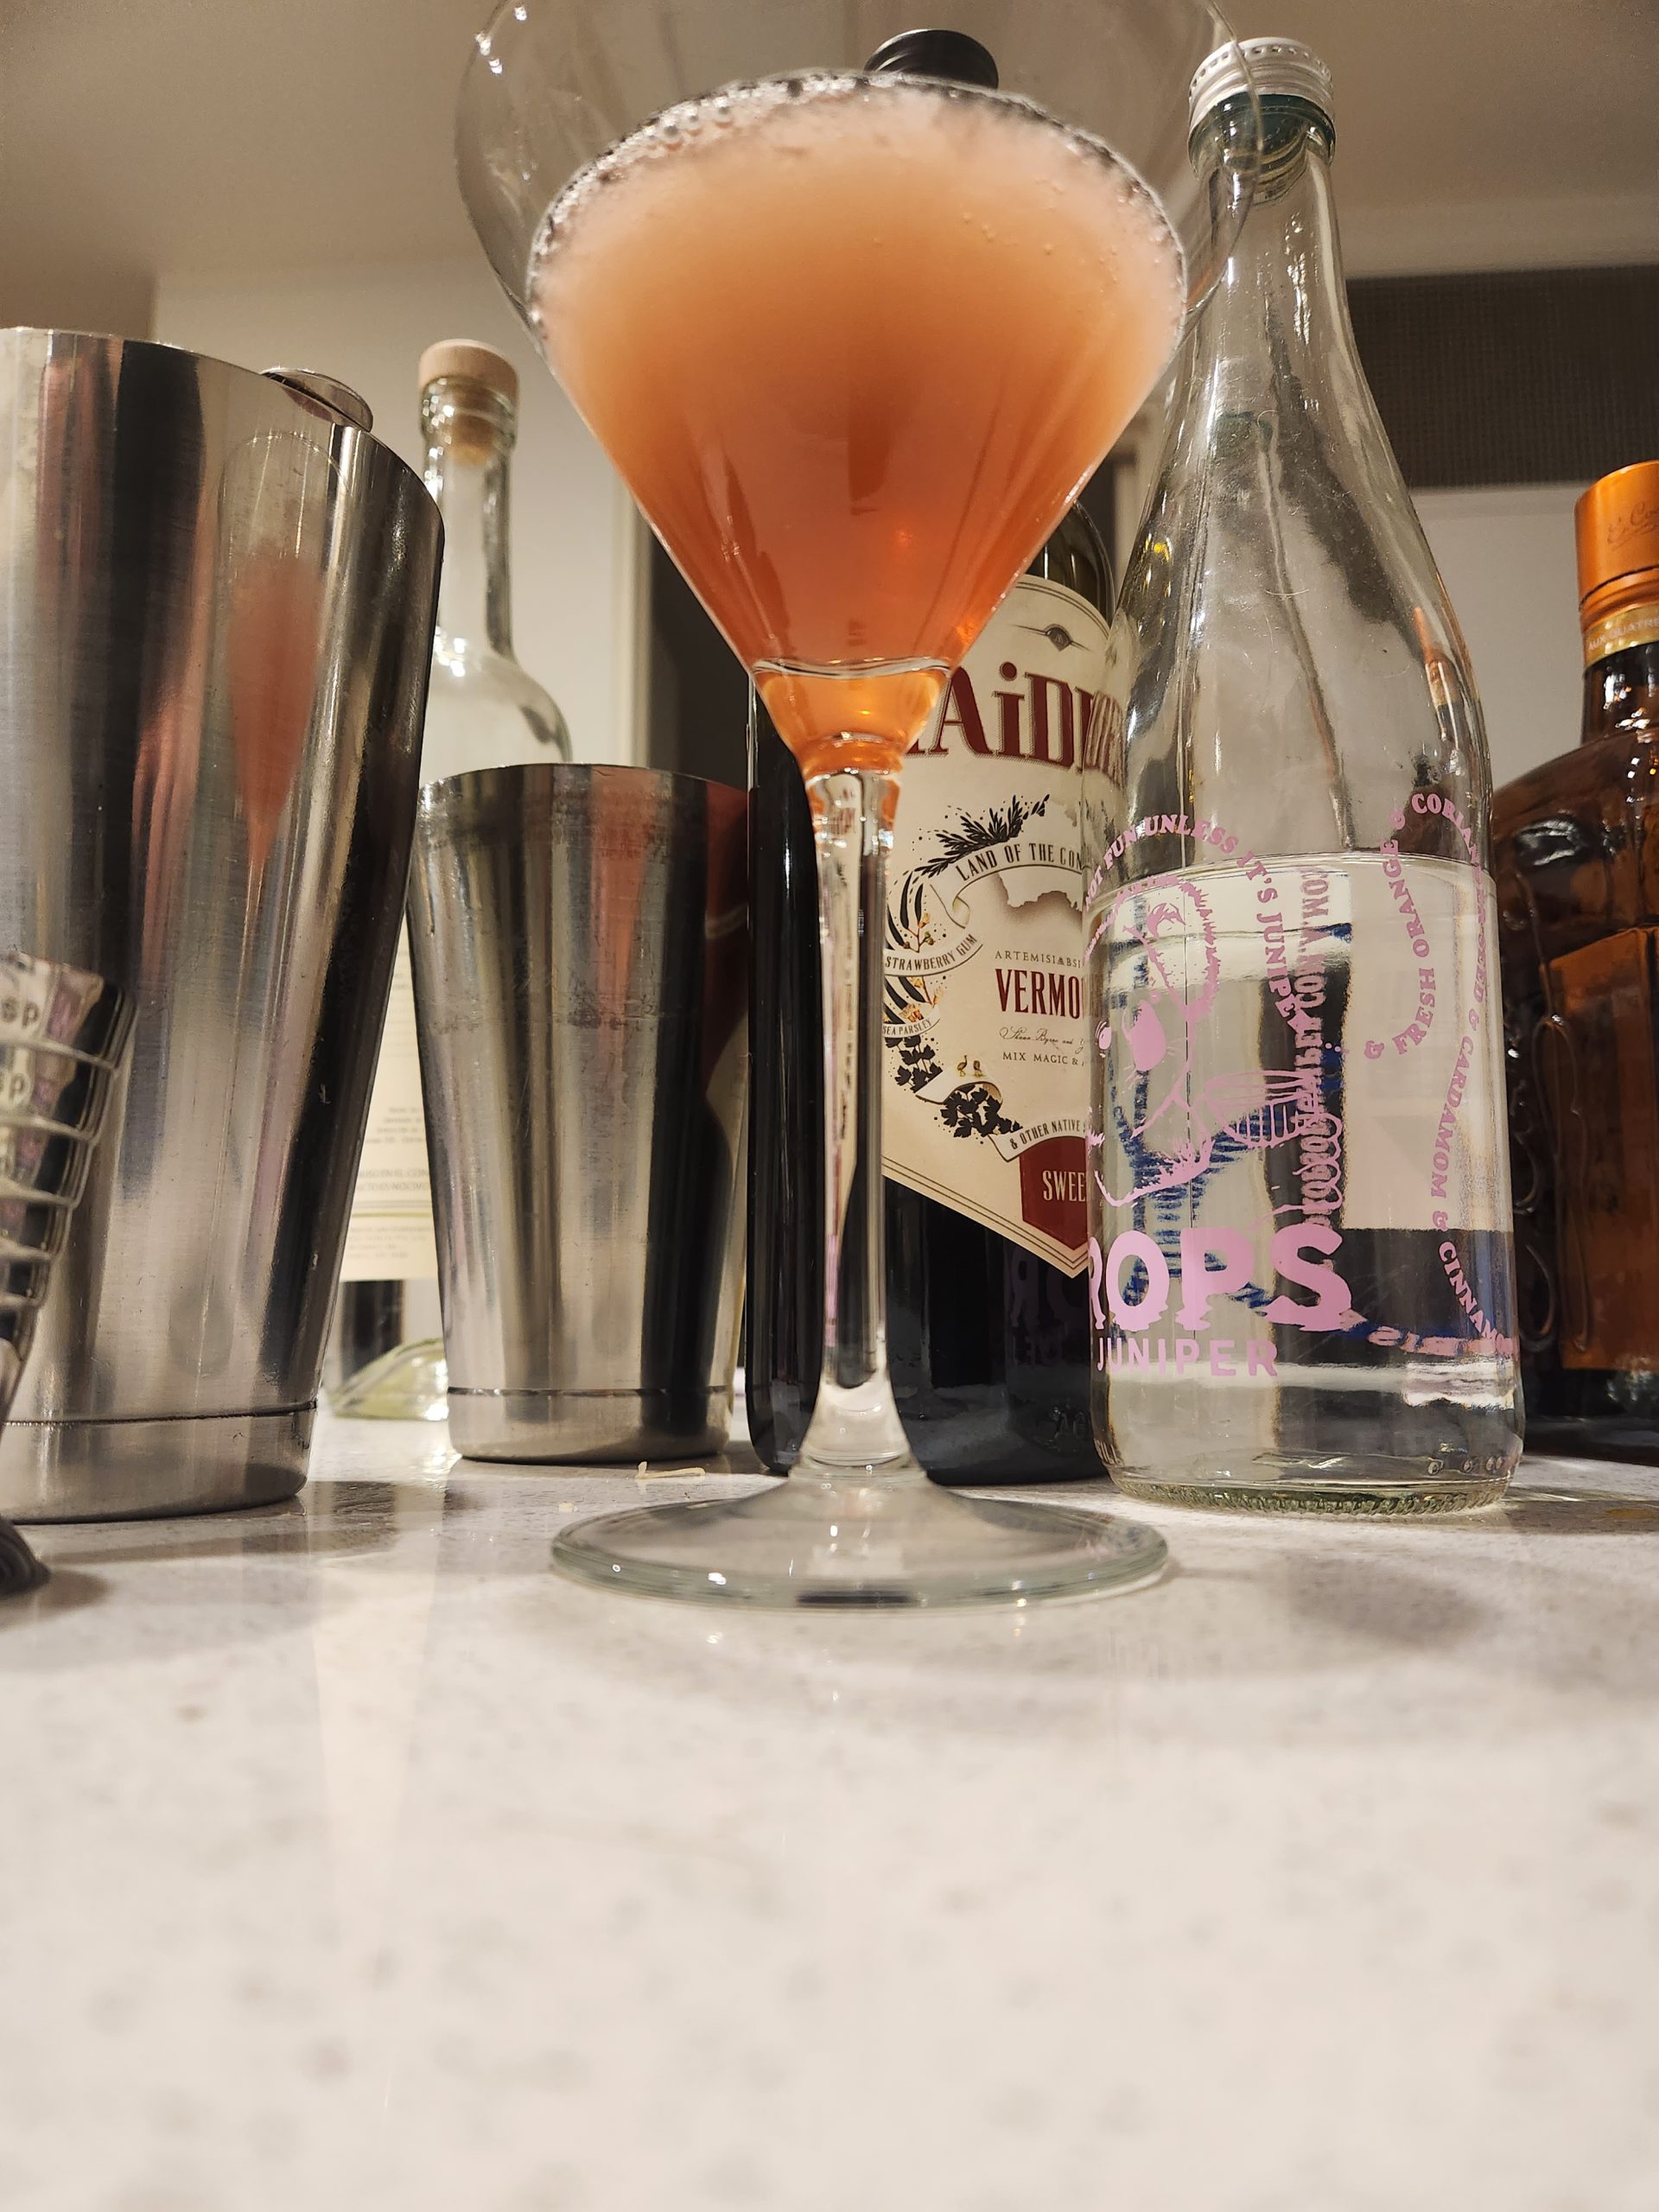 A Hanky Panky Cocktail with various ingredients behind it.